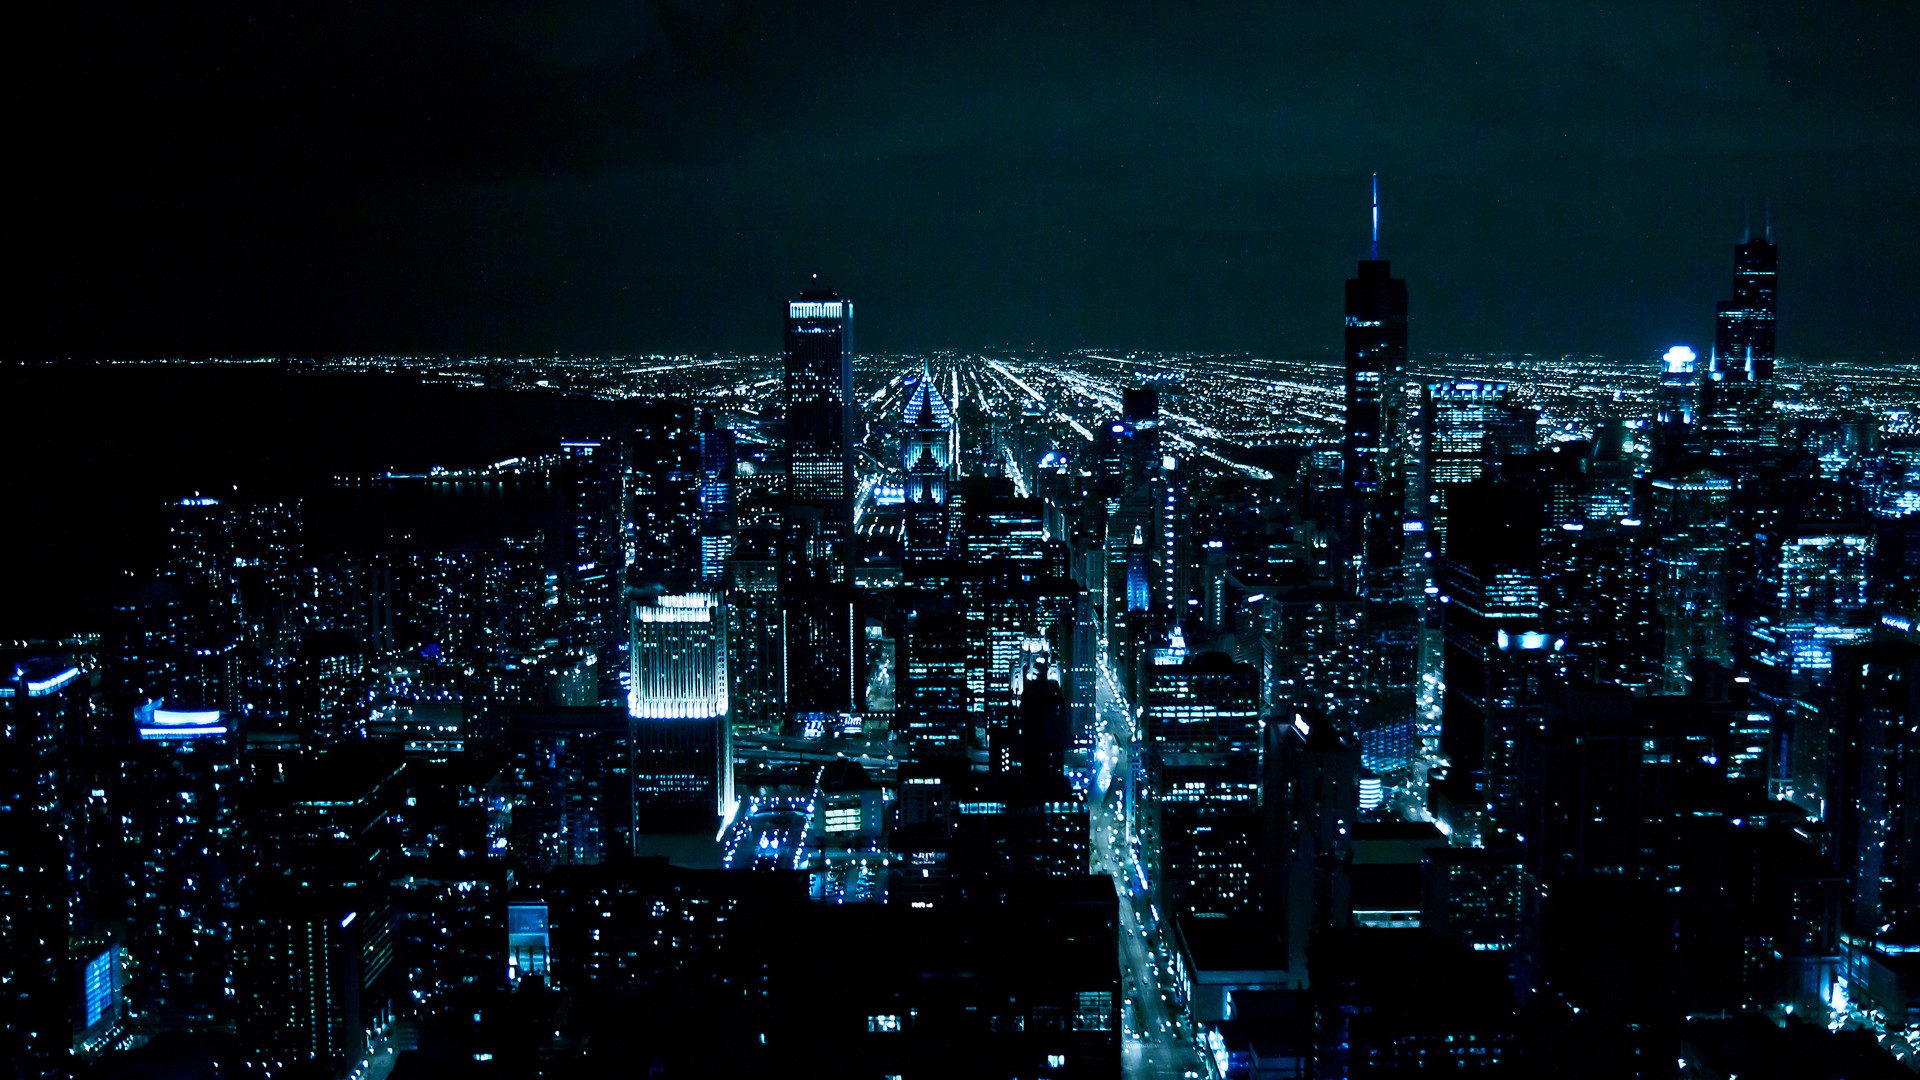 Download The Dark Night Chicago as Gotham Wallpaper Free Wallpapers